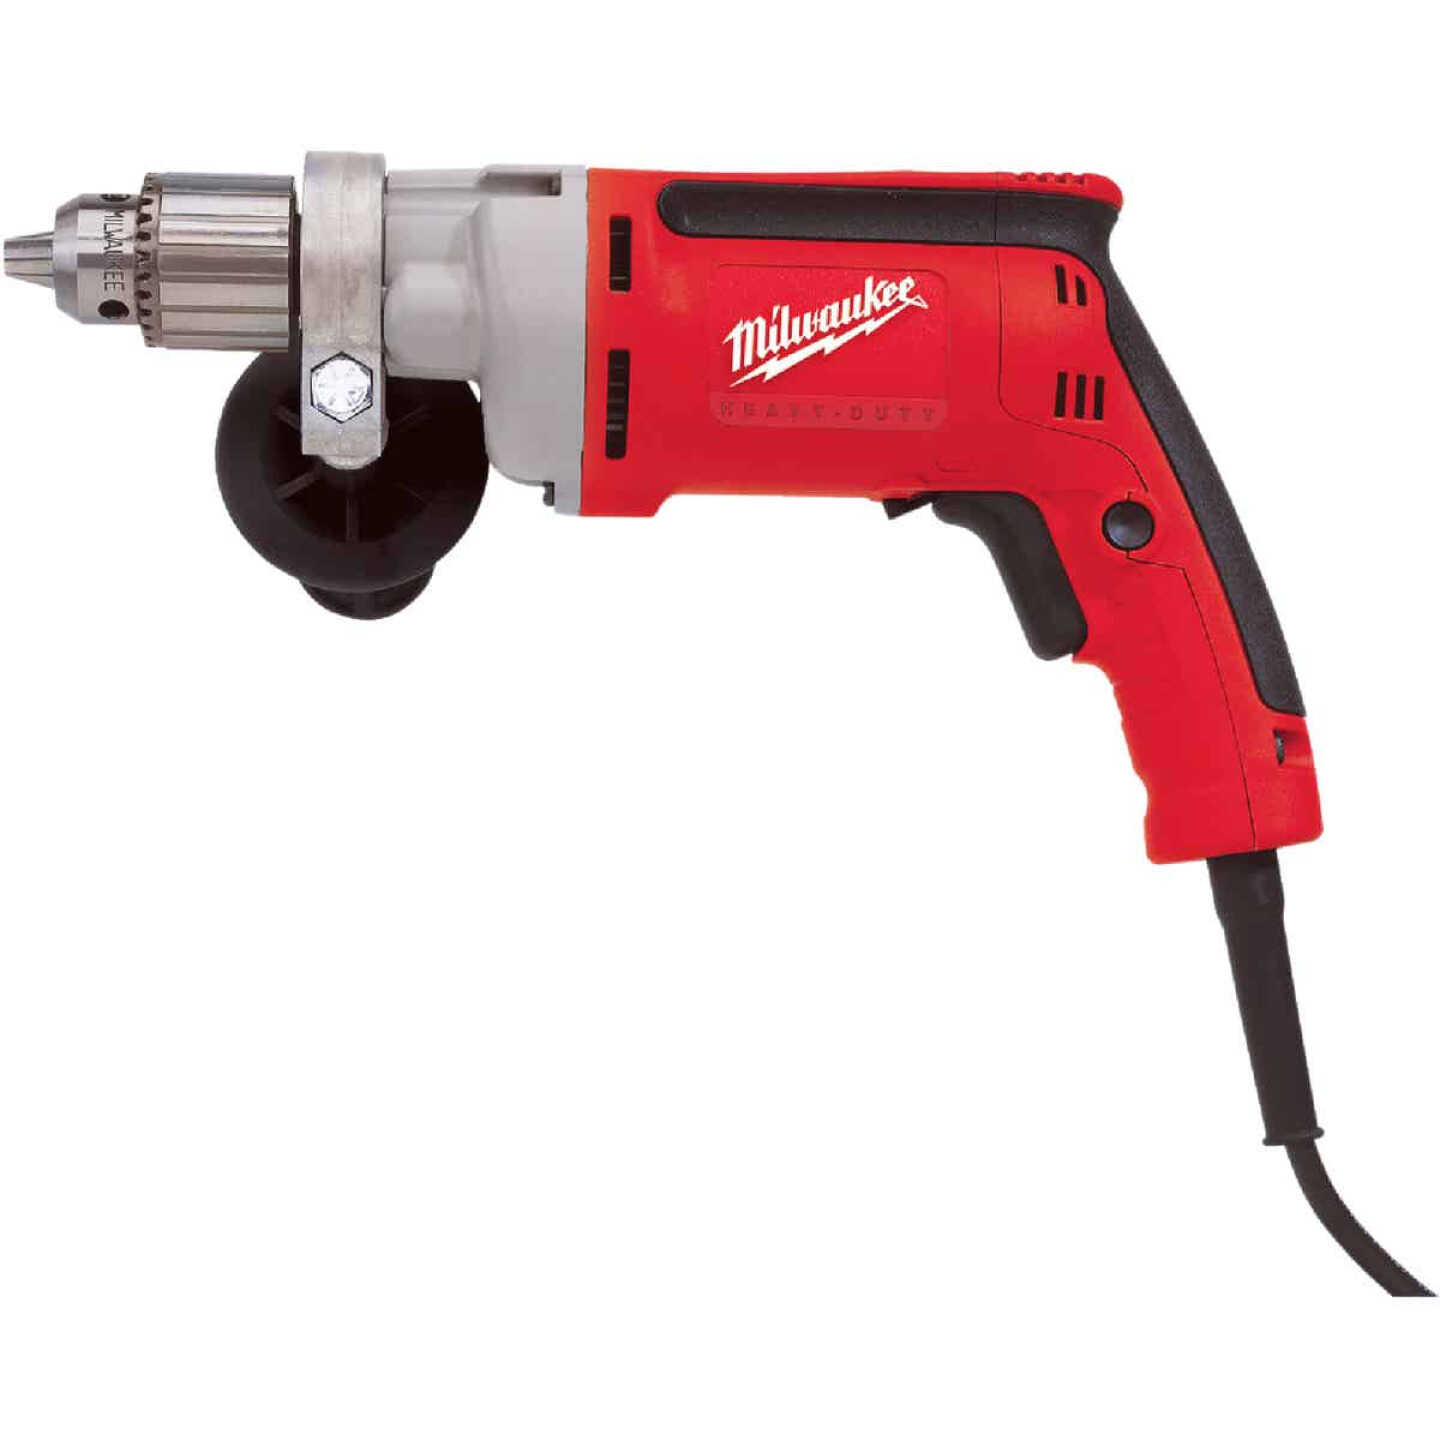 Milwaukee Magnum 1/2 In. 8-Amp Keyed Electric Drill with Tactile Grip Image 1